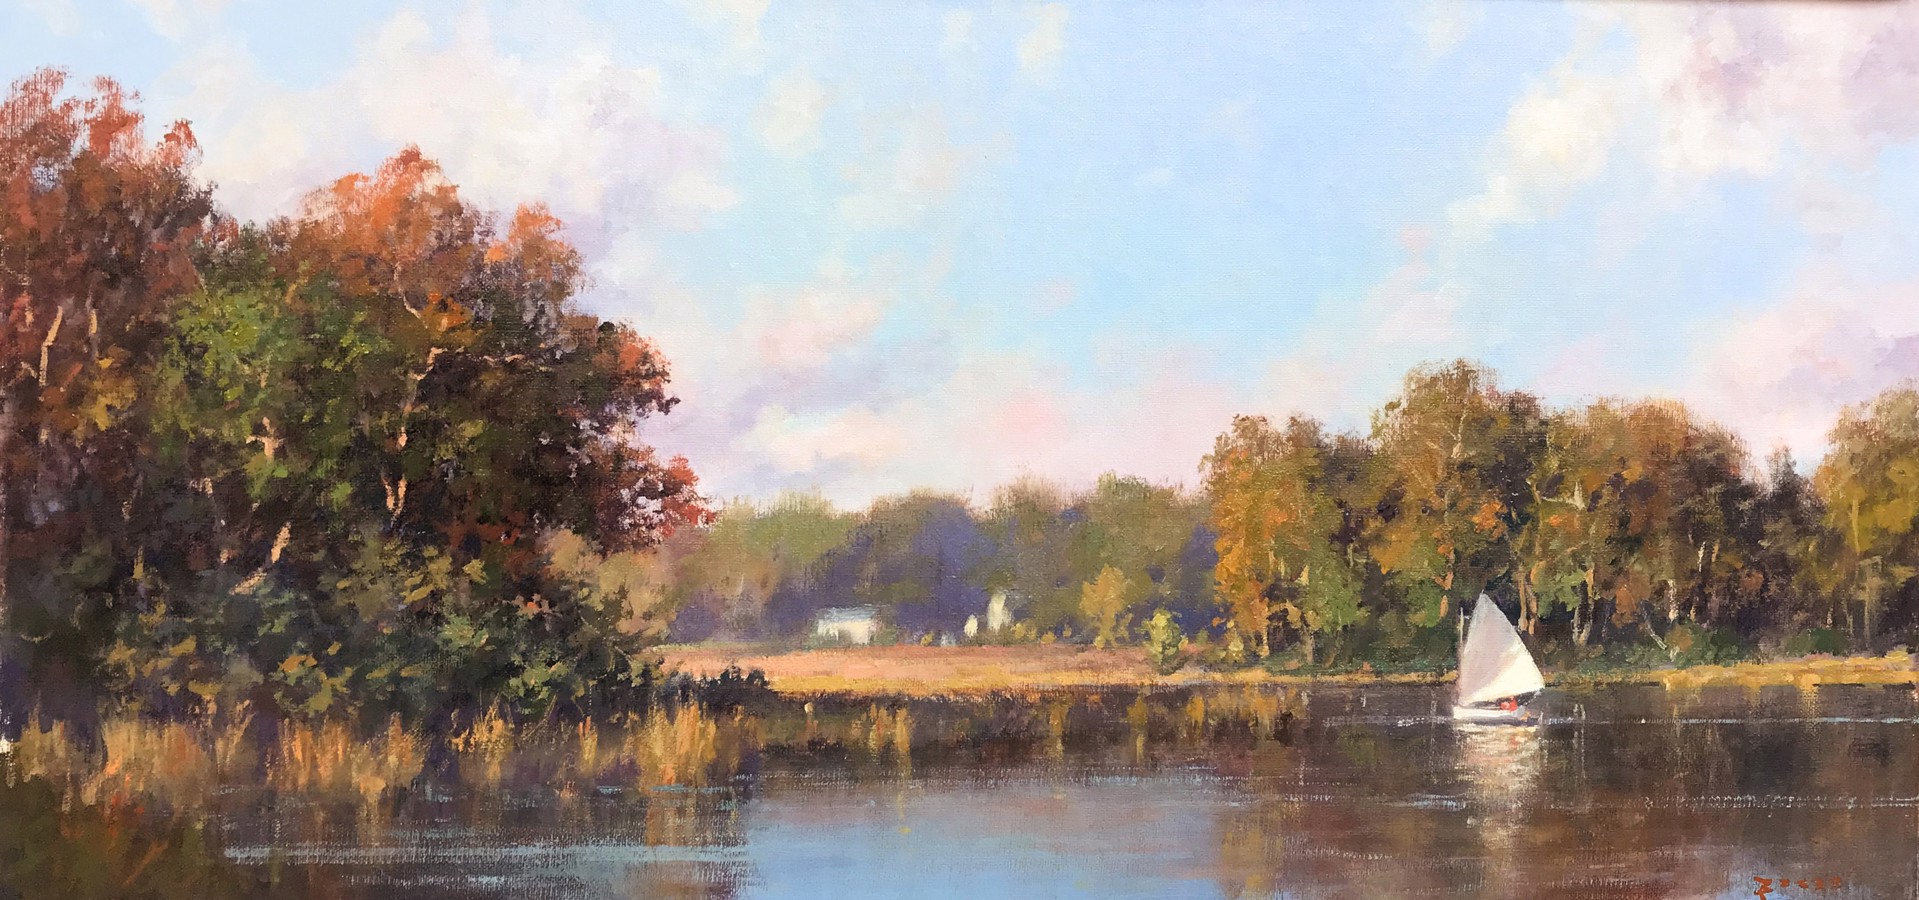 Afternoon Sail on the Connecticut River by Paul Beebe